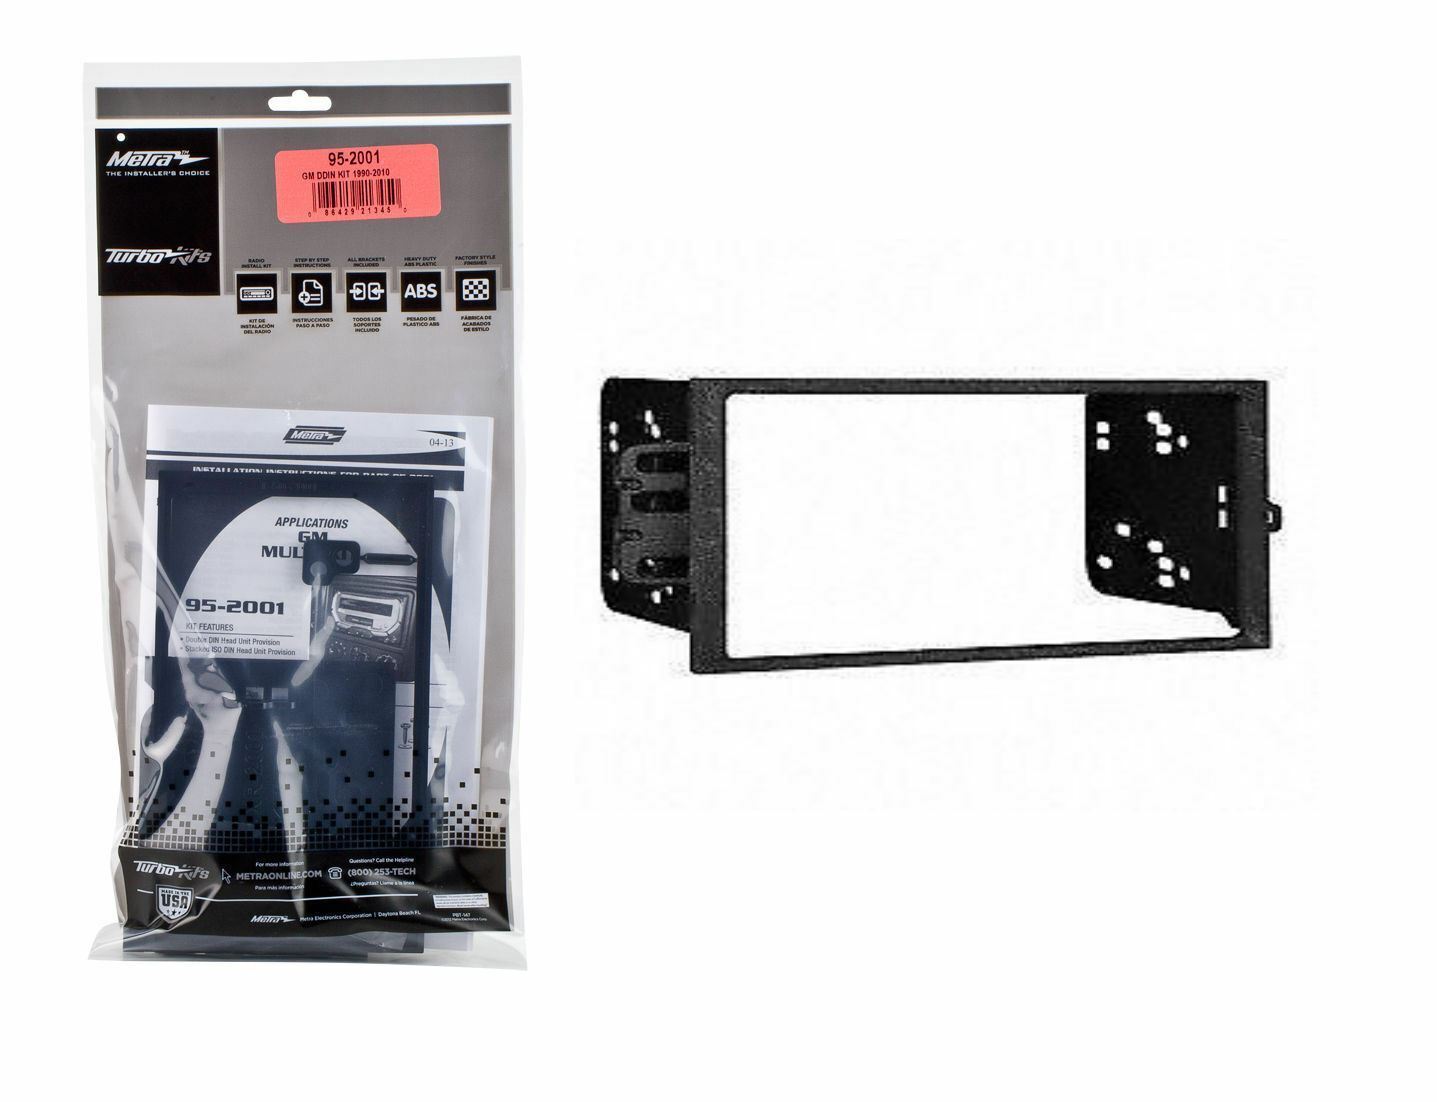 Metra 95-2001 Double Din Dash Kit for Stereo Replacement for Select Vehicles